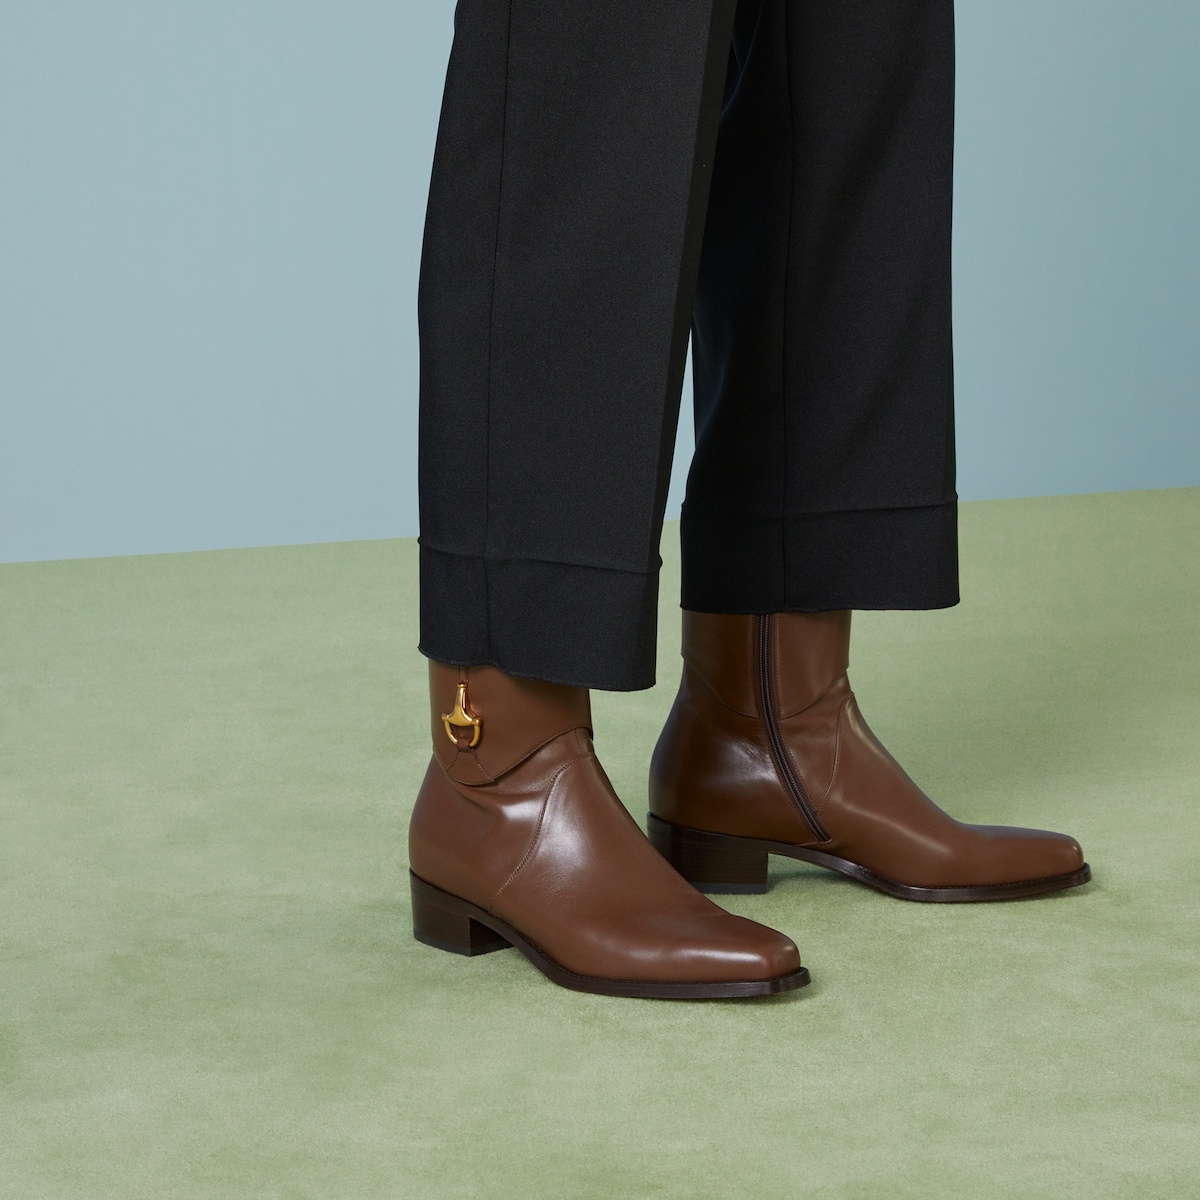 Men's ankle boot with Horsebit detail - 3